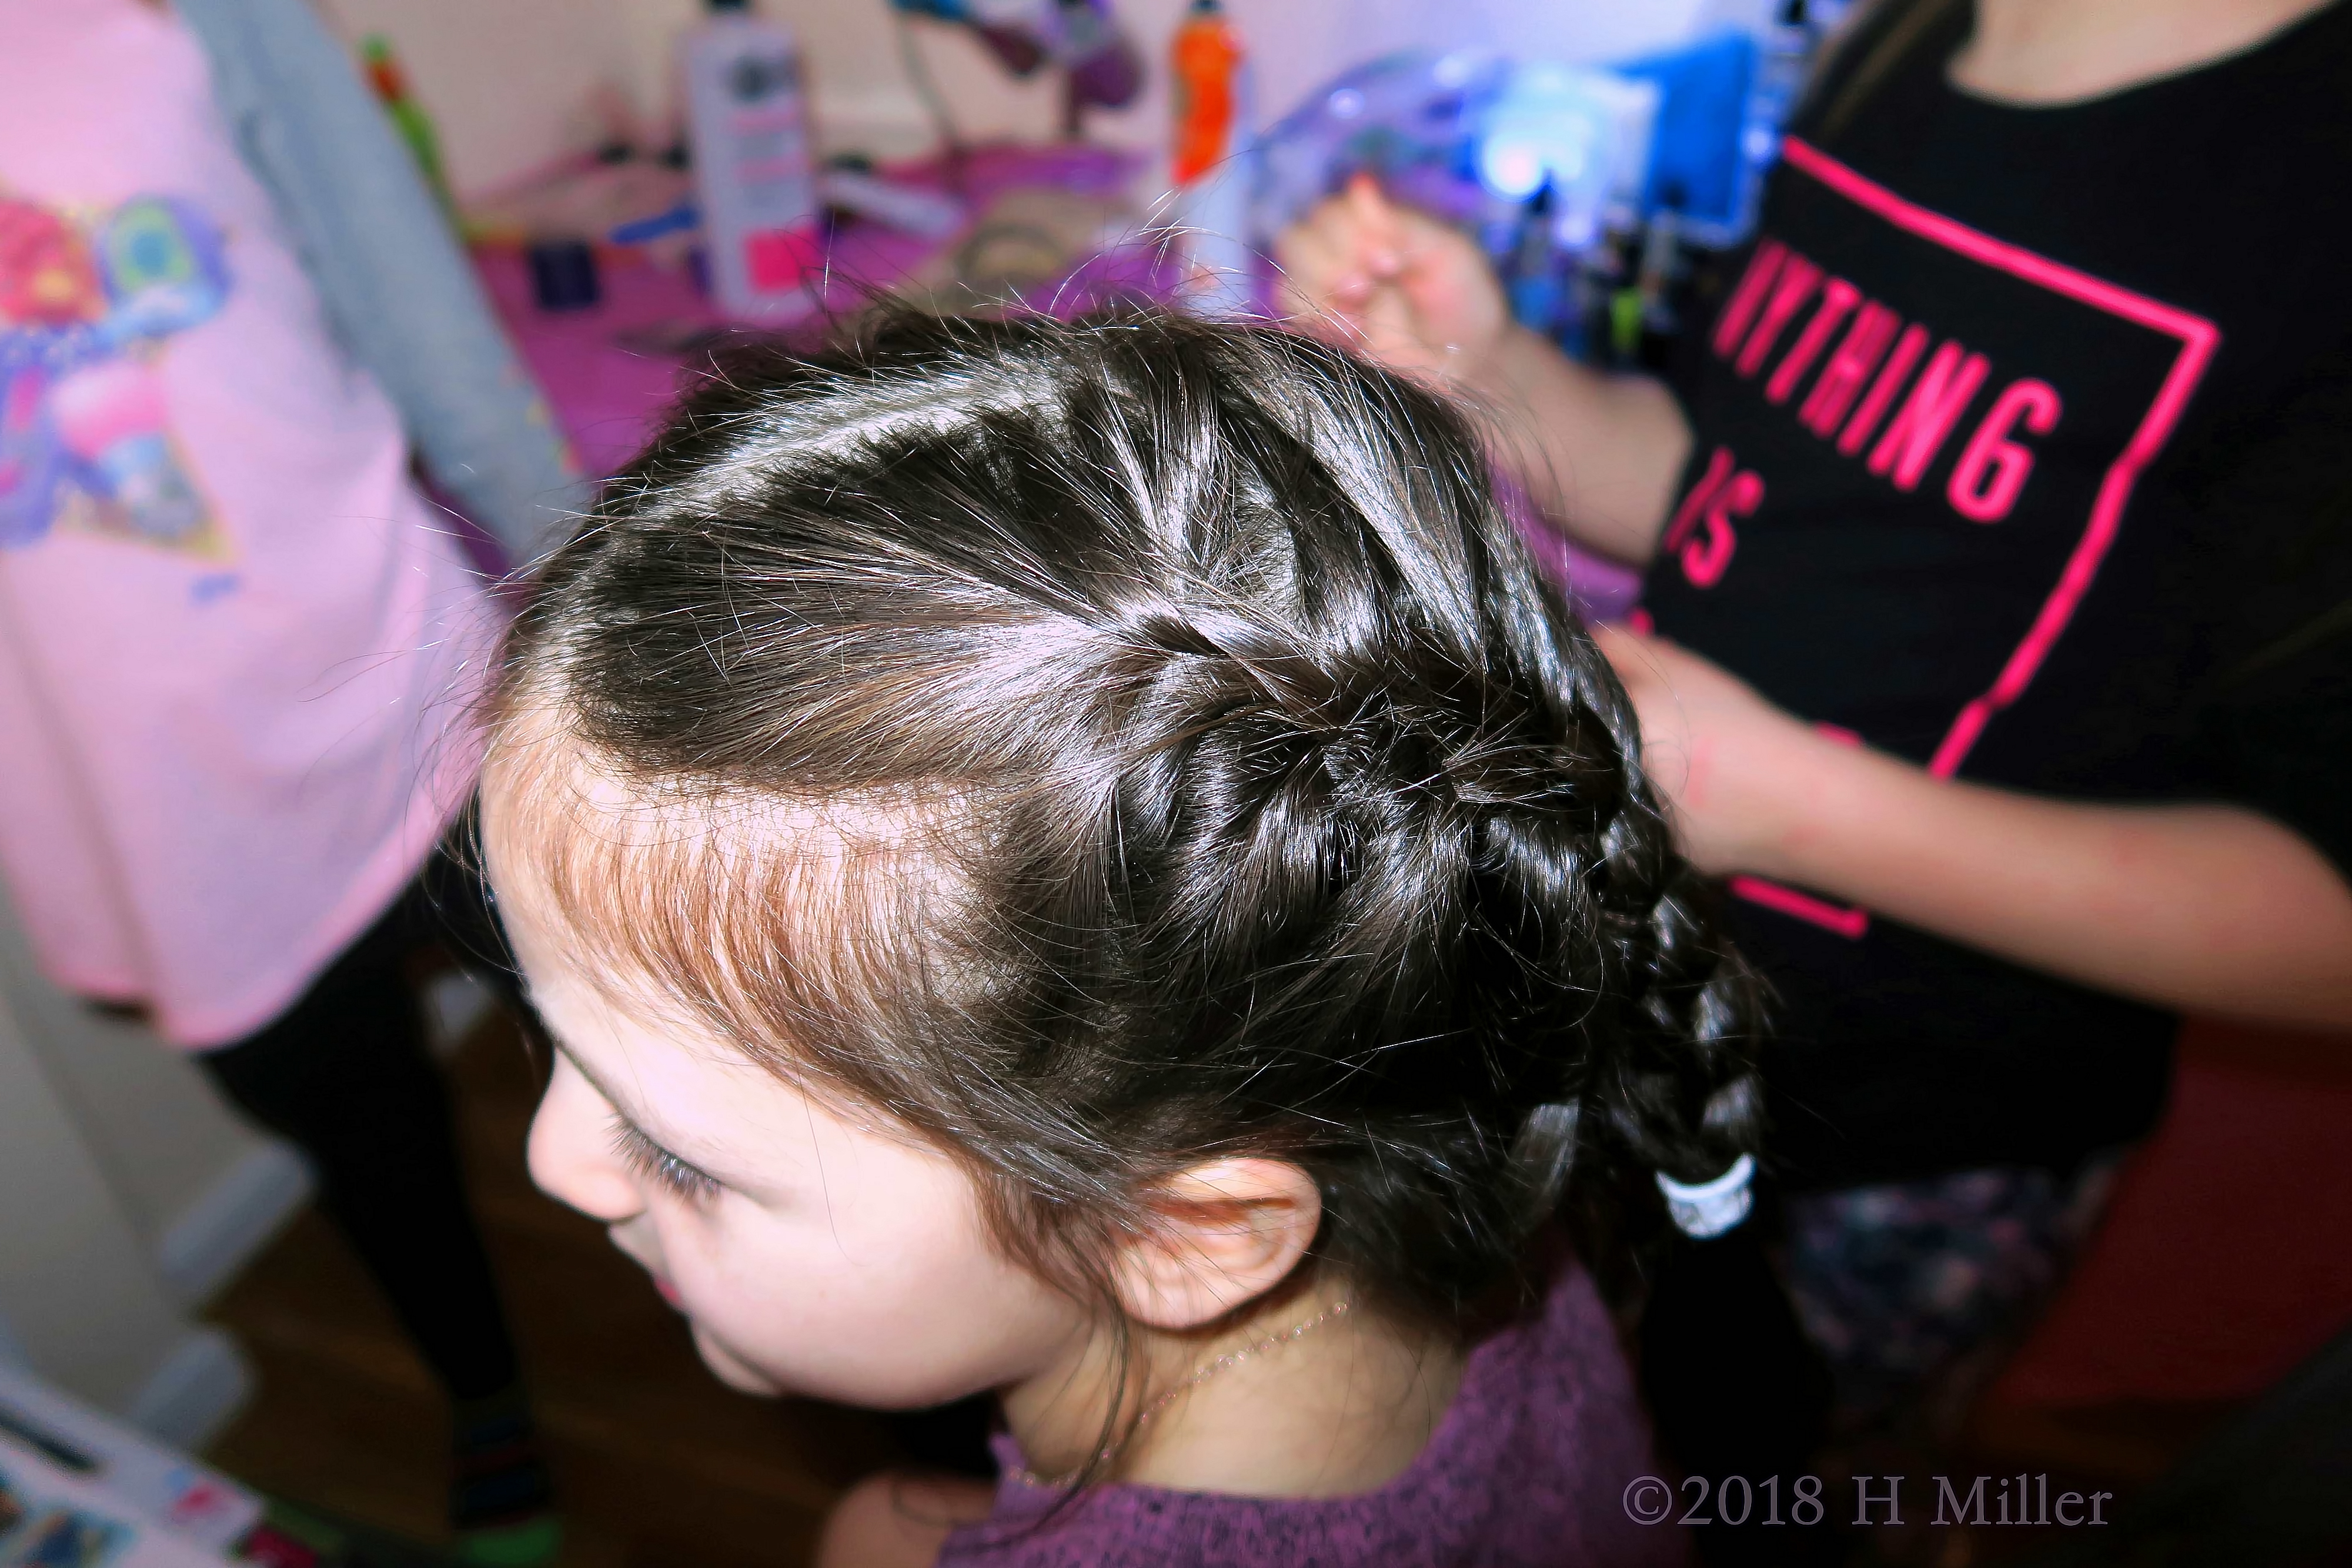 Braids And Bonding! Girls Chat Over Dutch French Braids Kids Hairstyles!